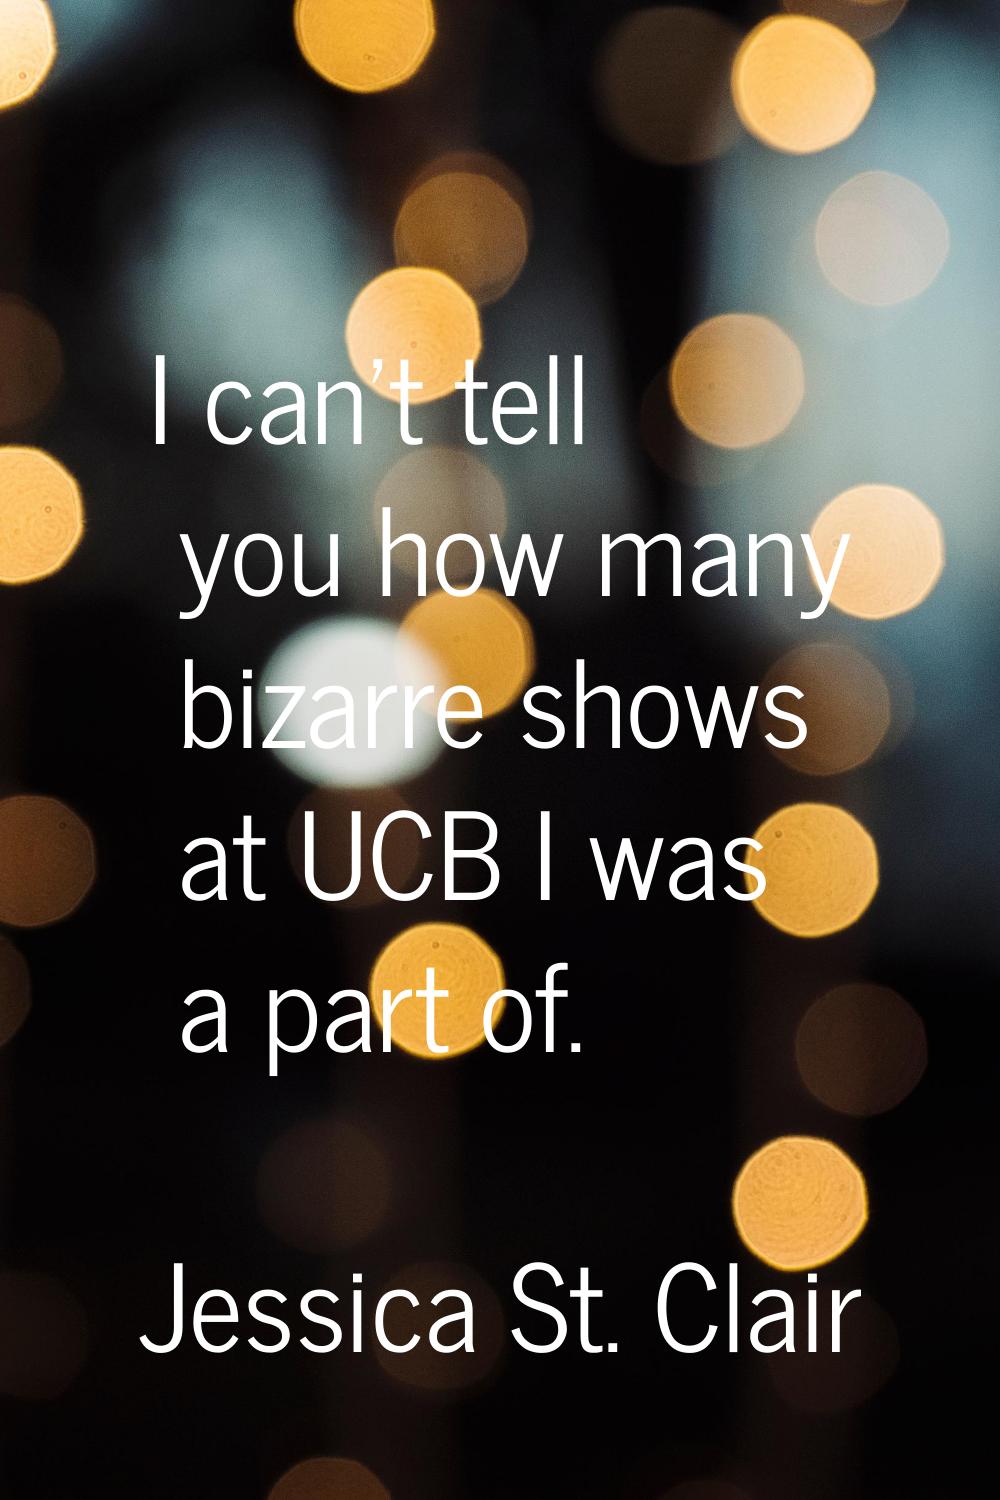 I can't tell you how many bizarre shows at UCB I was a part of.